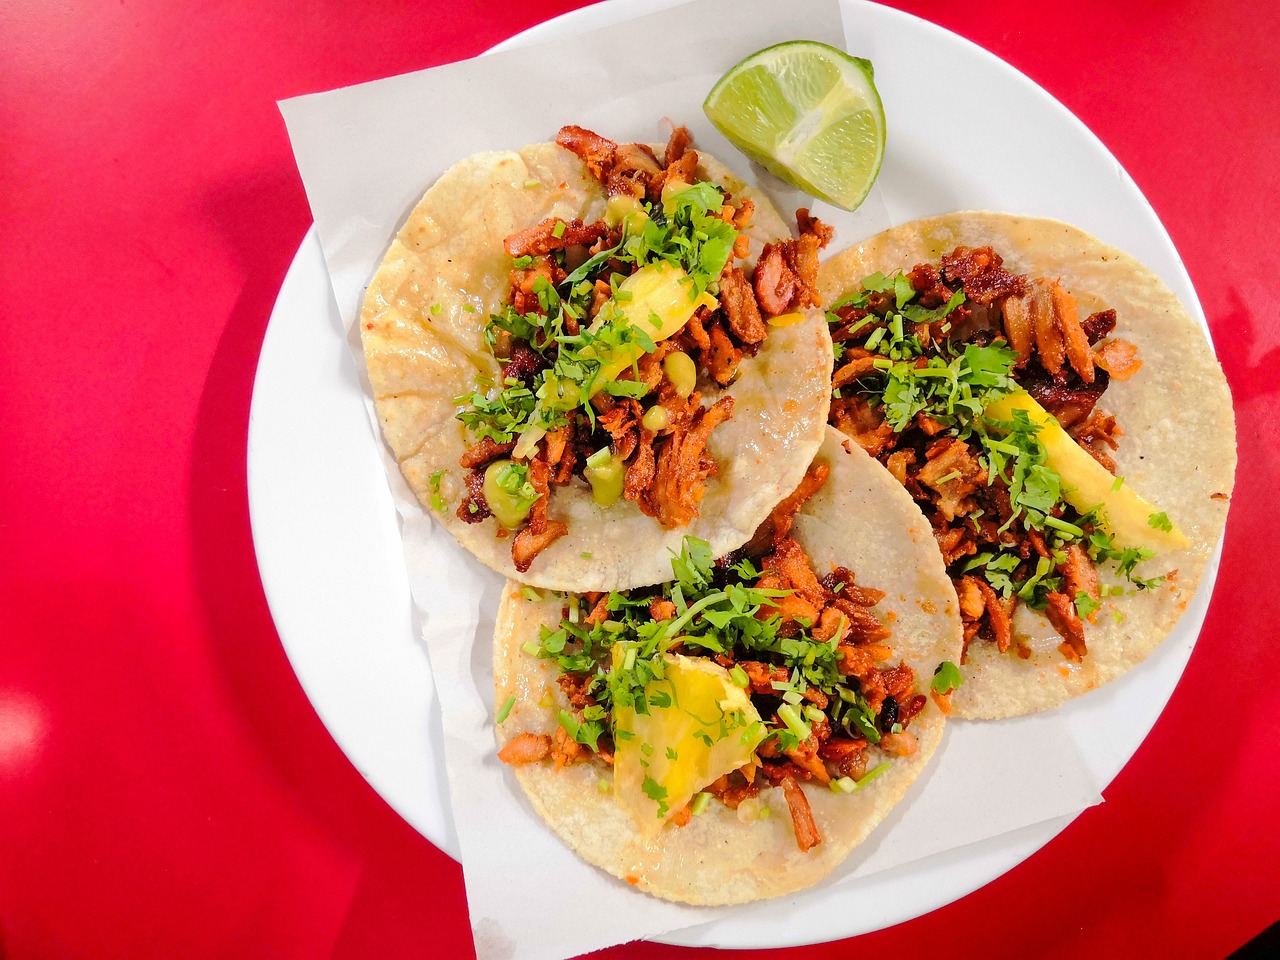 Plate with 3 tacos and a red background